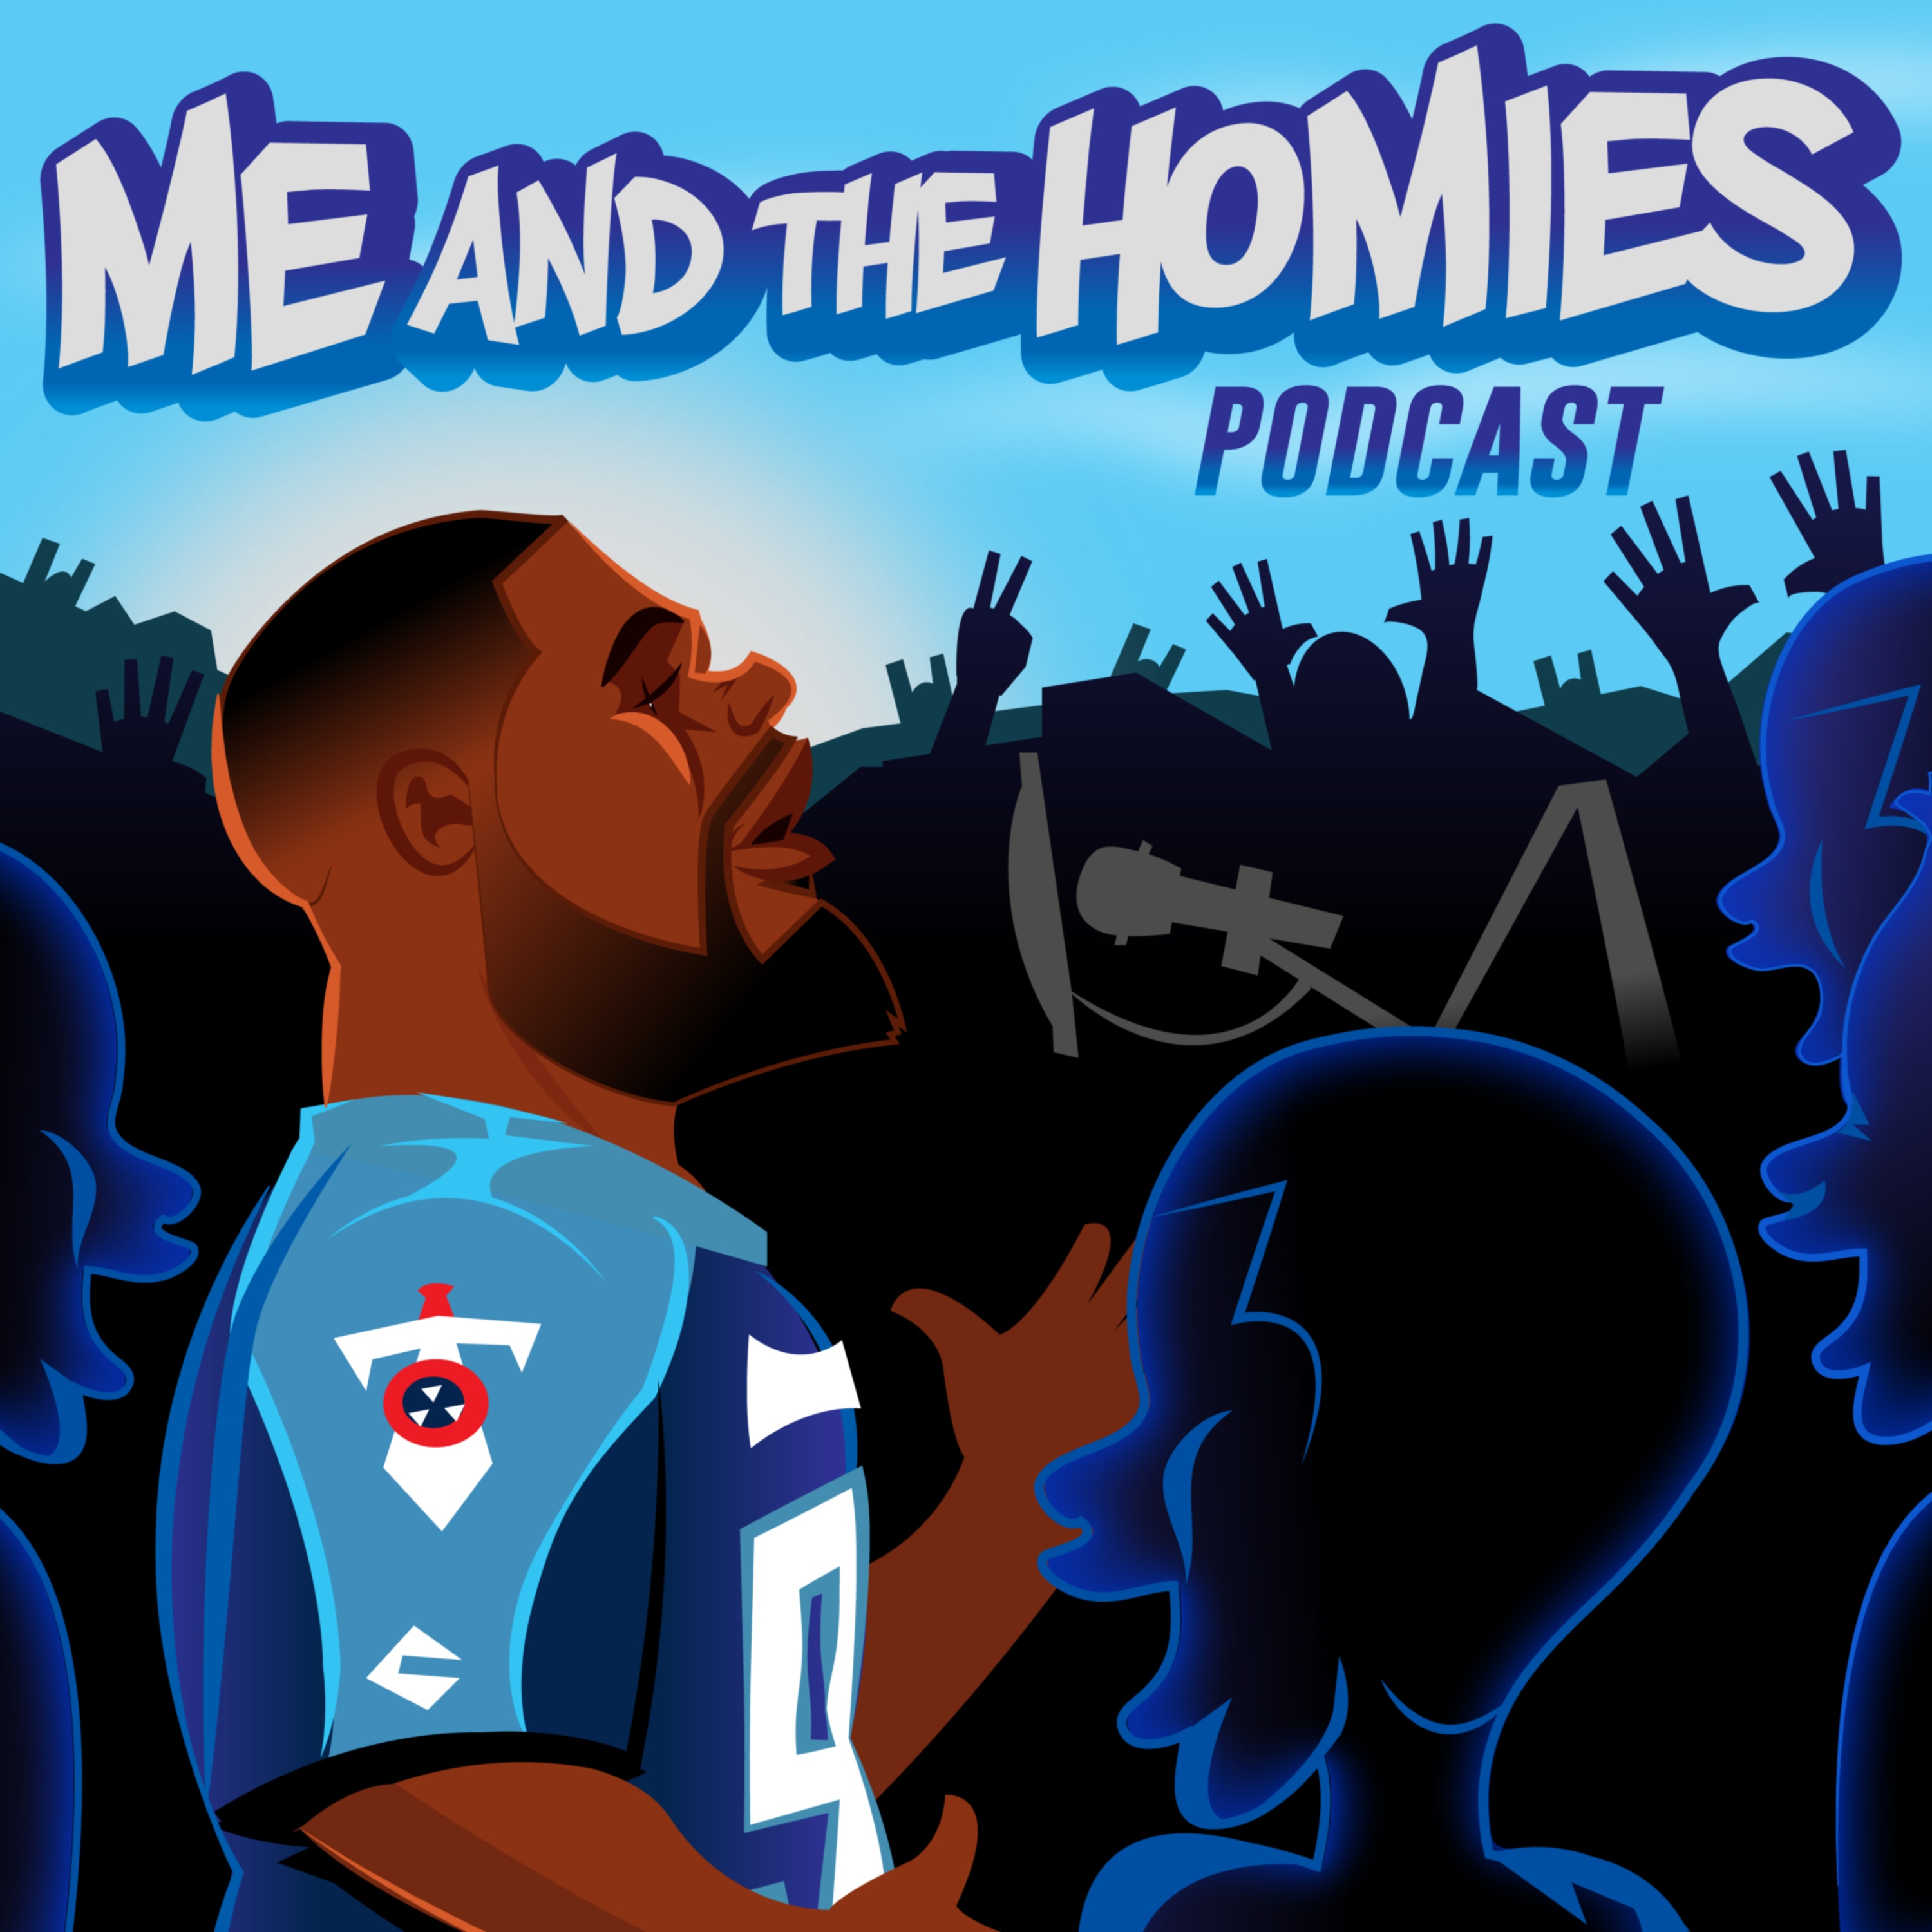 The Me and the Homies Podcast